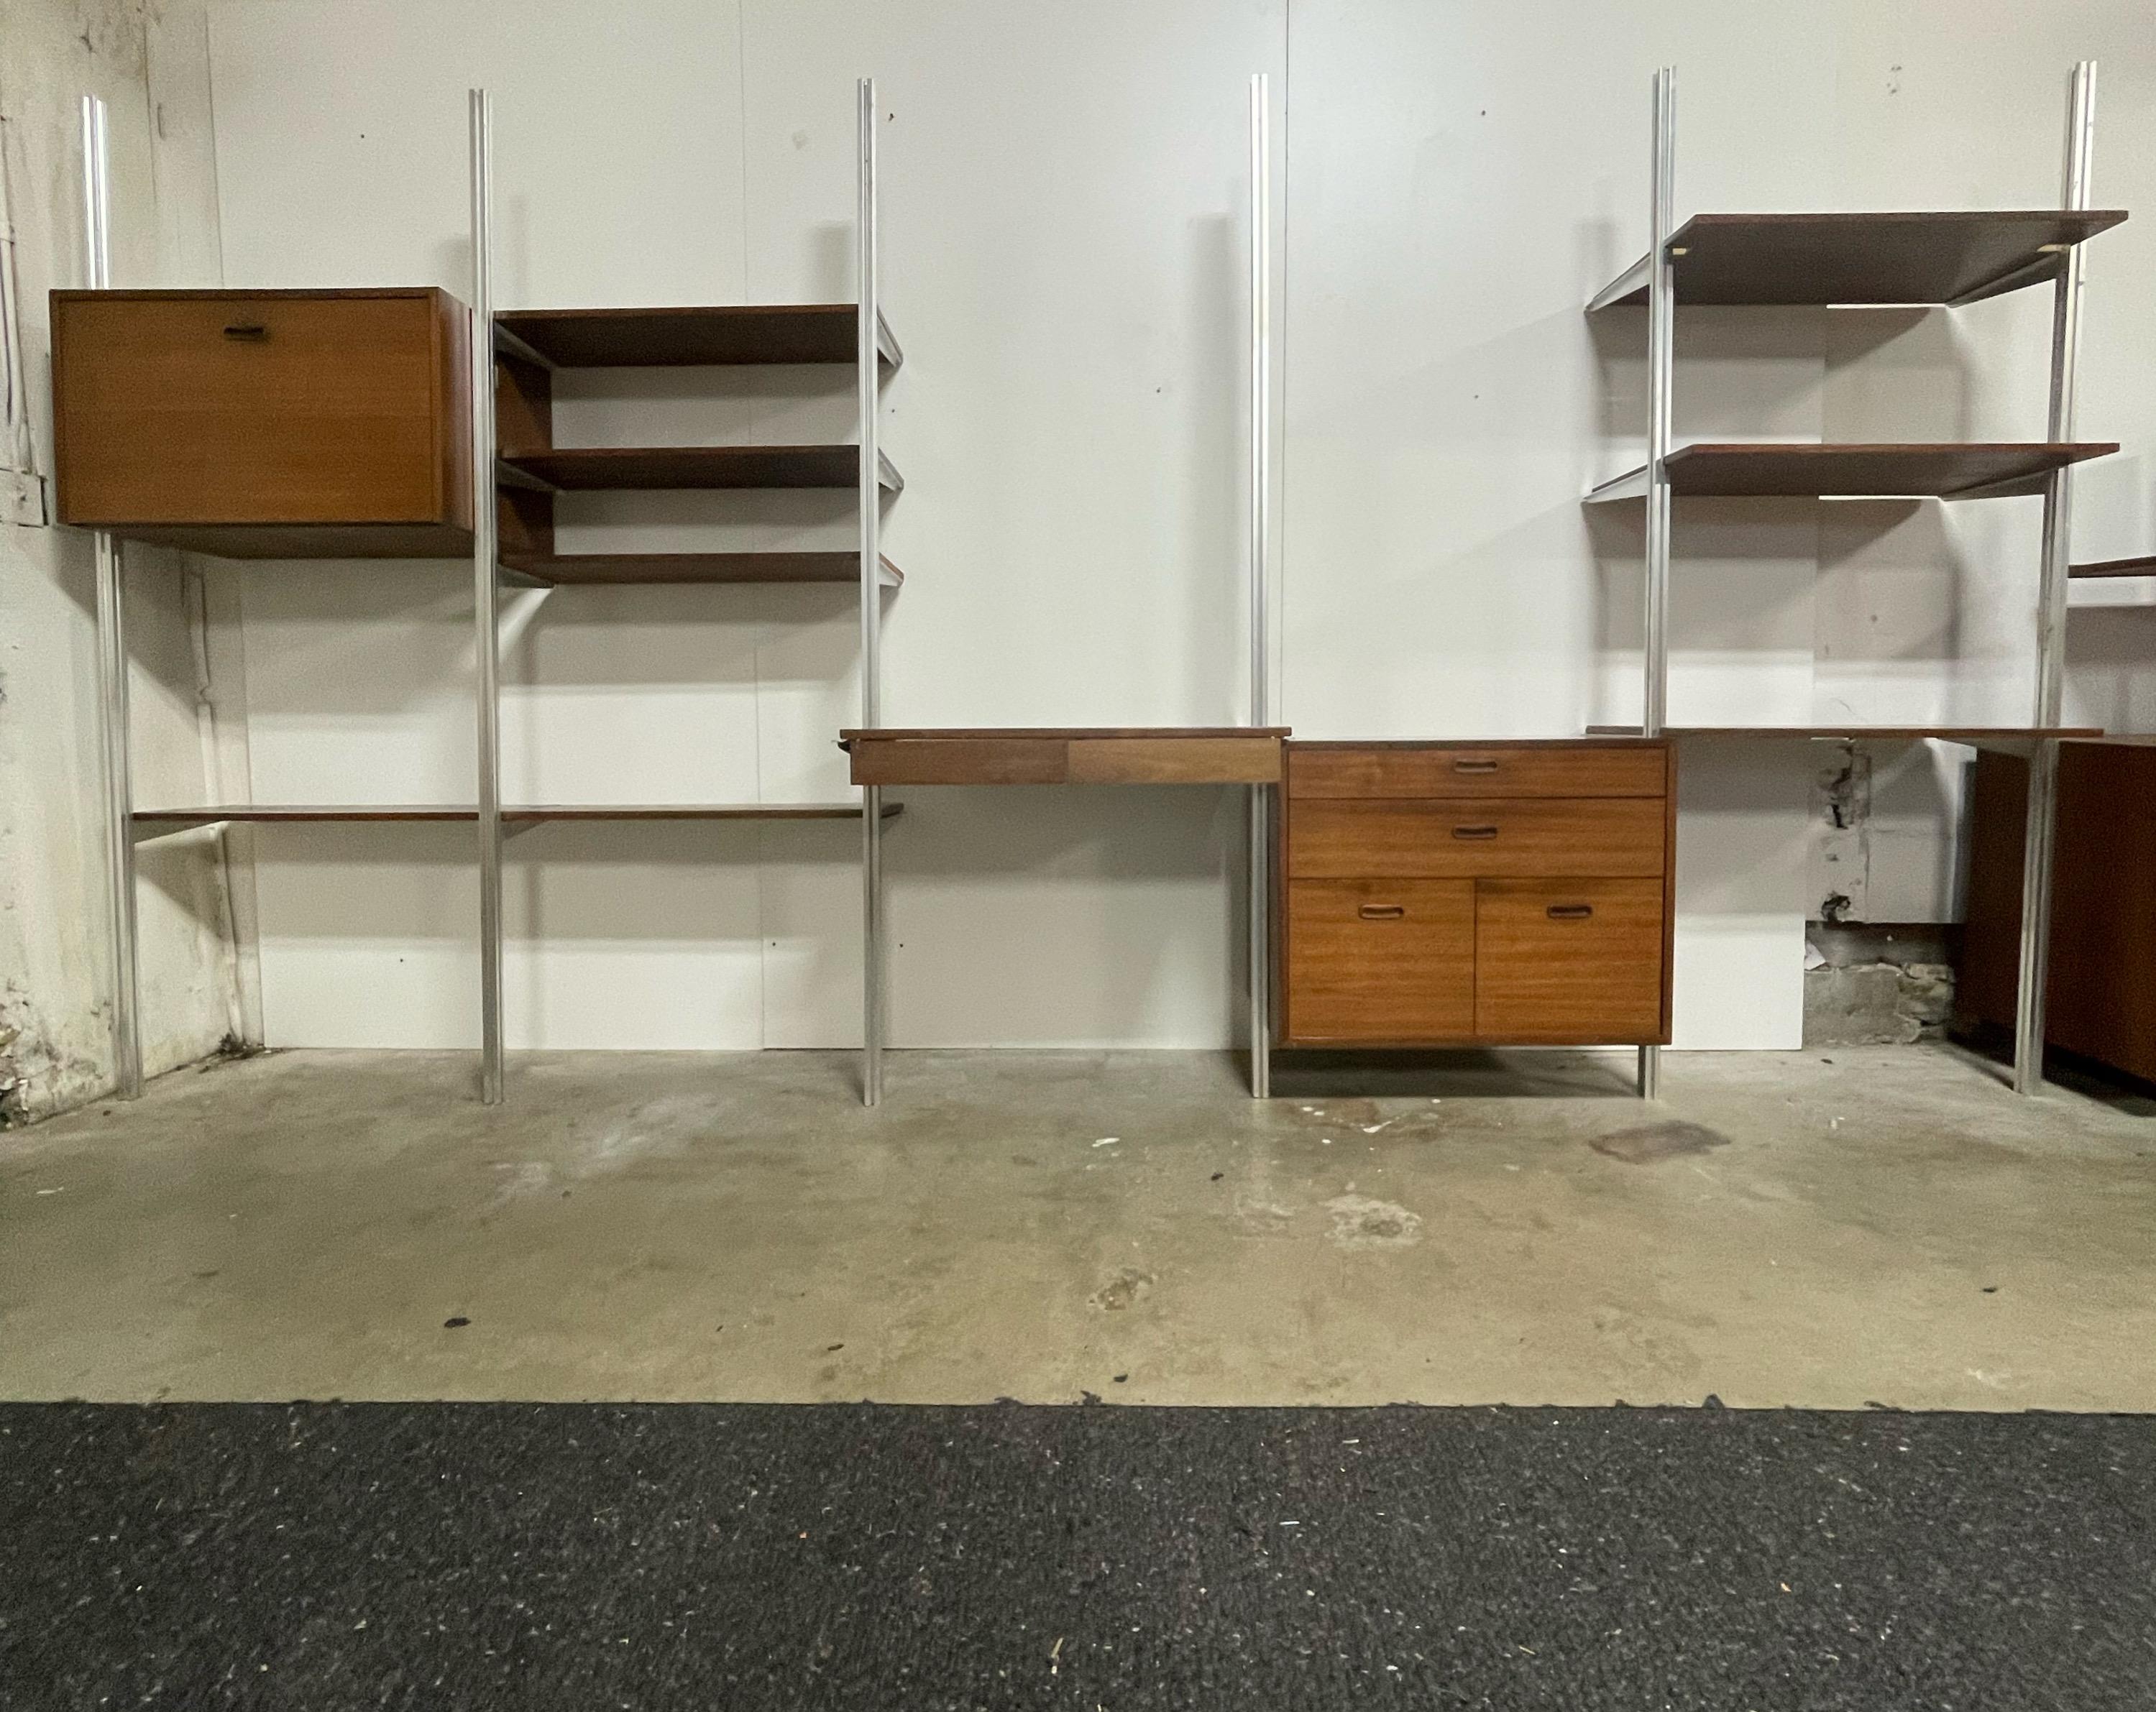 Incredible mid century tension rod wall unit. Designed by the legendary George Nelson. The Omni Unit. (It does have the Omni stamp inside the cabinet) 5 bays total. This unit offers 8 shelves, 1 desk with 2 drawers that slide with ease, a flip down